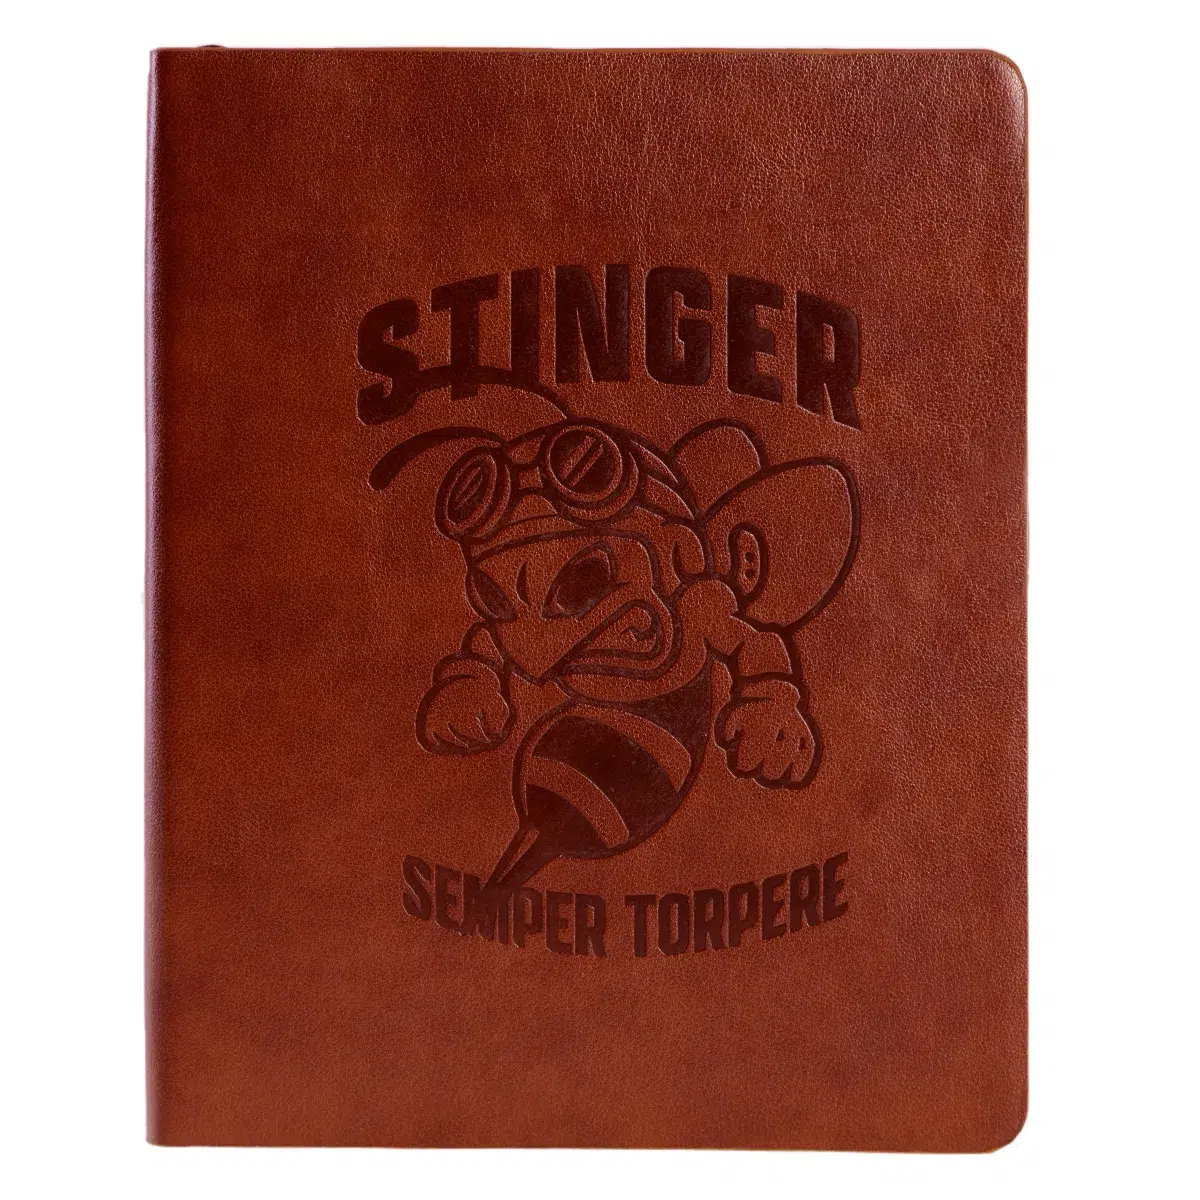 Call of Duty: Notebook "Stinger" Cover